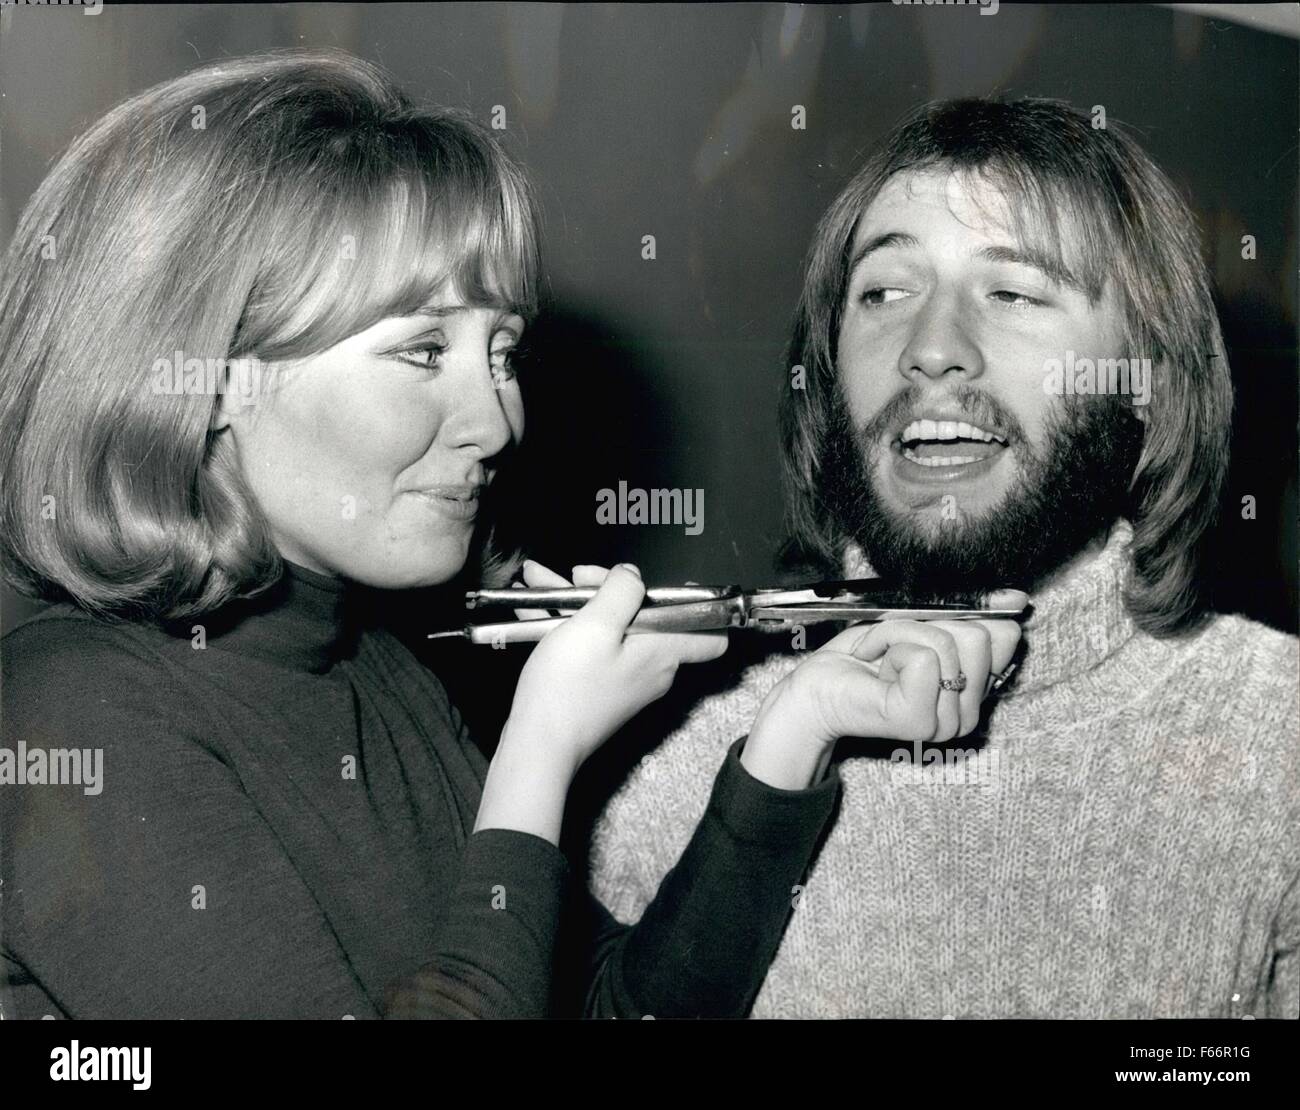 1970 - Maurice Gibb Wins A Stage Role - But Loses His Beard: It's one ...